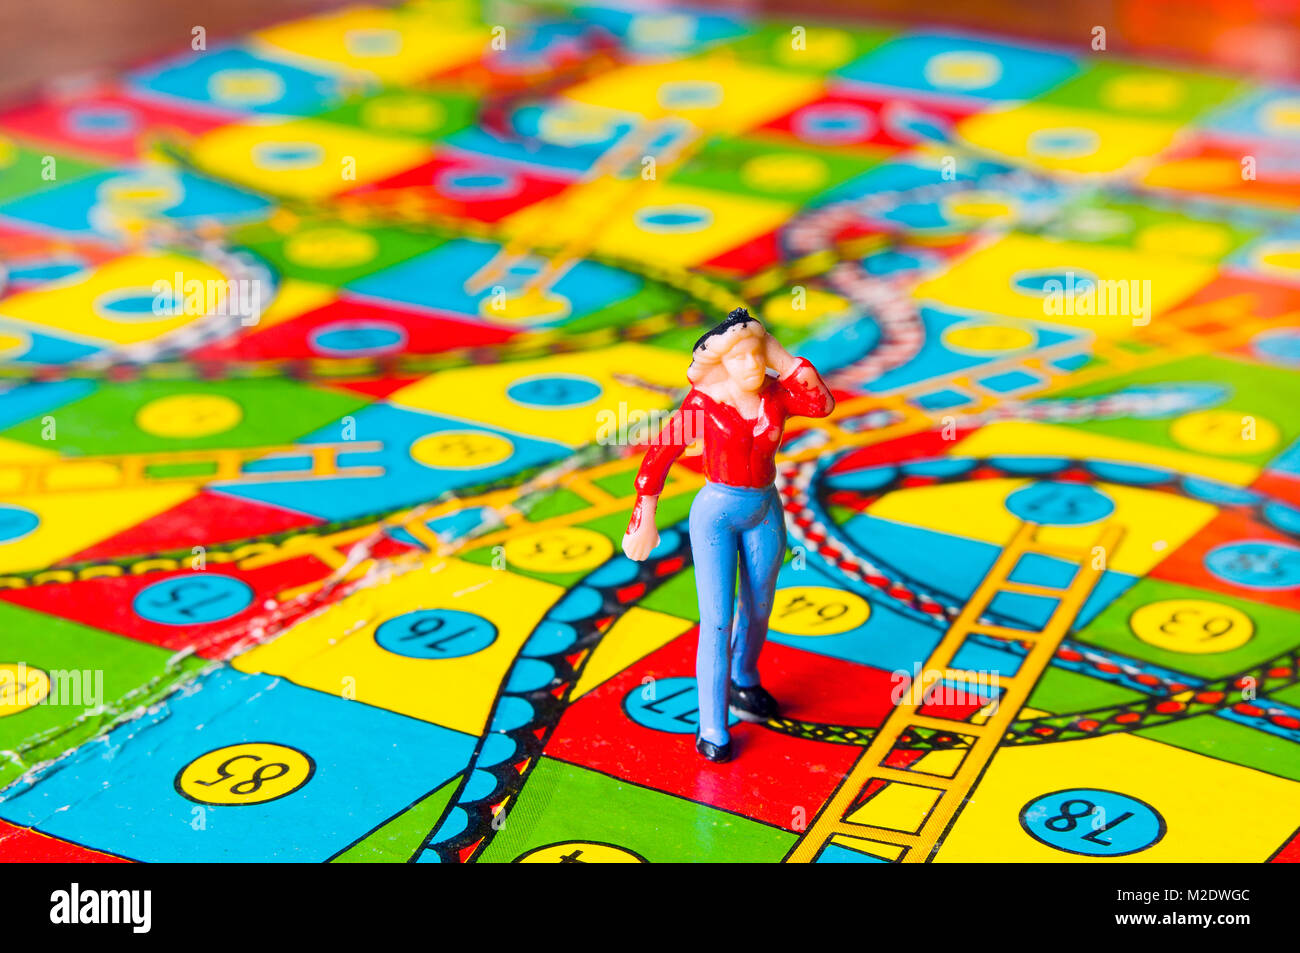 Retro Snakes and ladders board with miniature human figure in studio setting, Melbourne, Australia Stock Photo